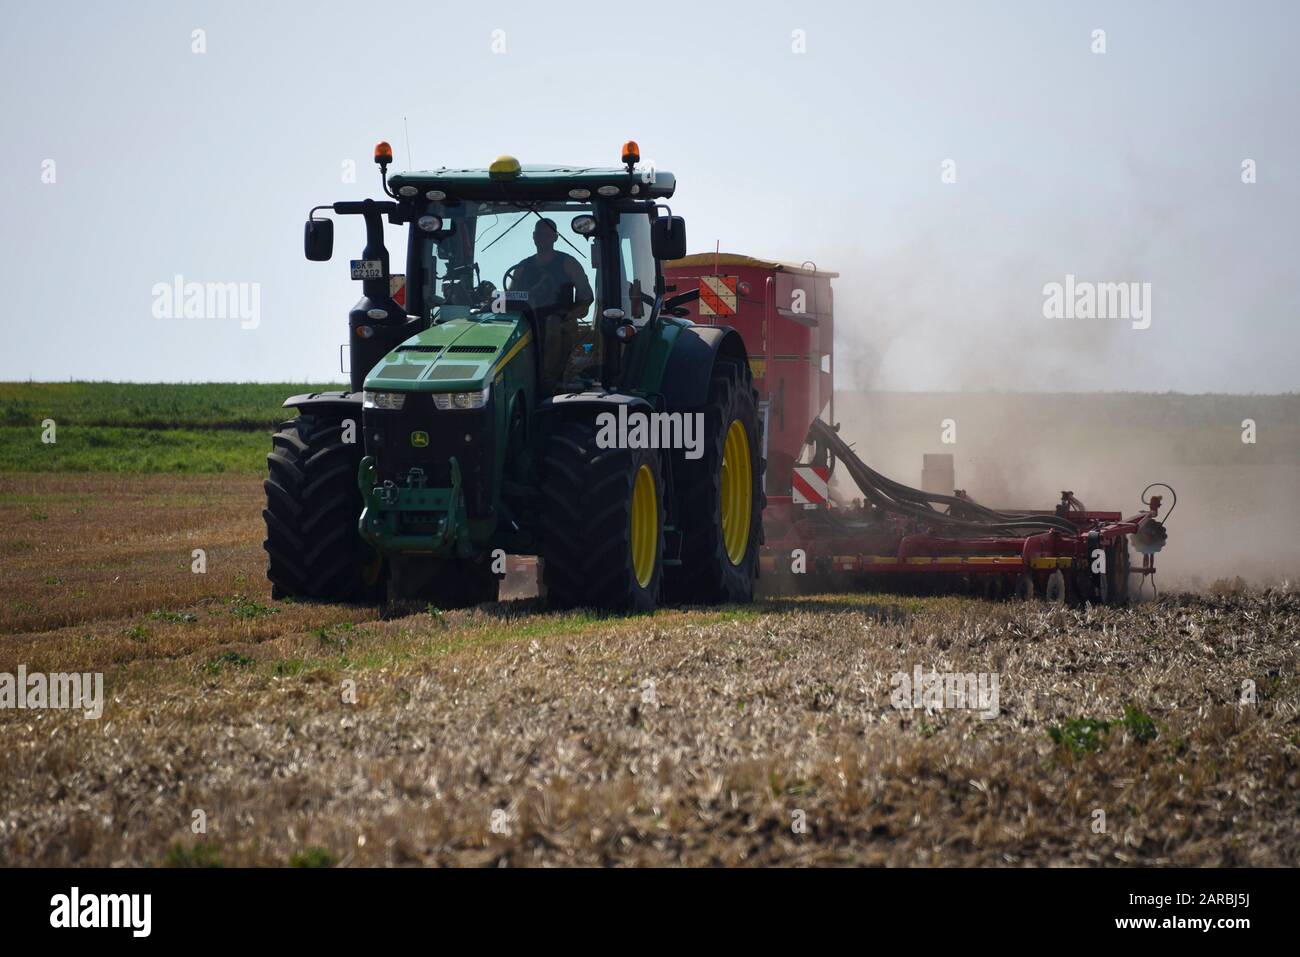 Hamersleben, Germany. 26th Aug, 2019. A high-tech tractor of the agricultural cooperative eG Hamersleben pulls a seed drill behind it for sowing. The machine inserts seeds individually and with centimetre precision into the soil. Credit: Stephan Schulz/dpa-Zentralbild/ZB/dpa/Alamy Live News Stock Photo